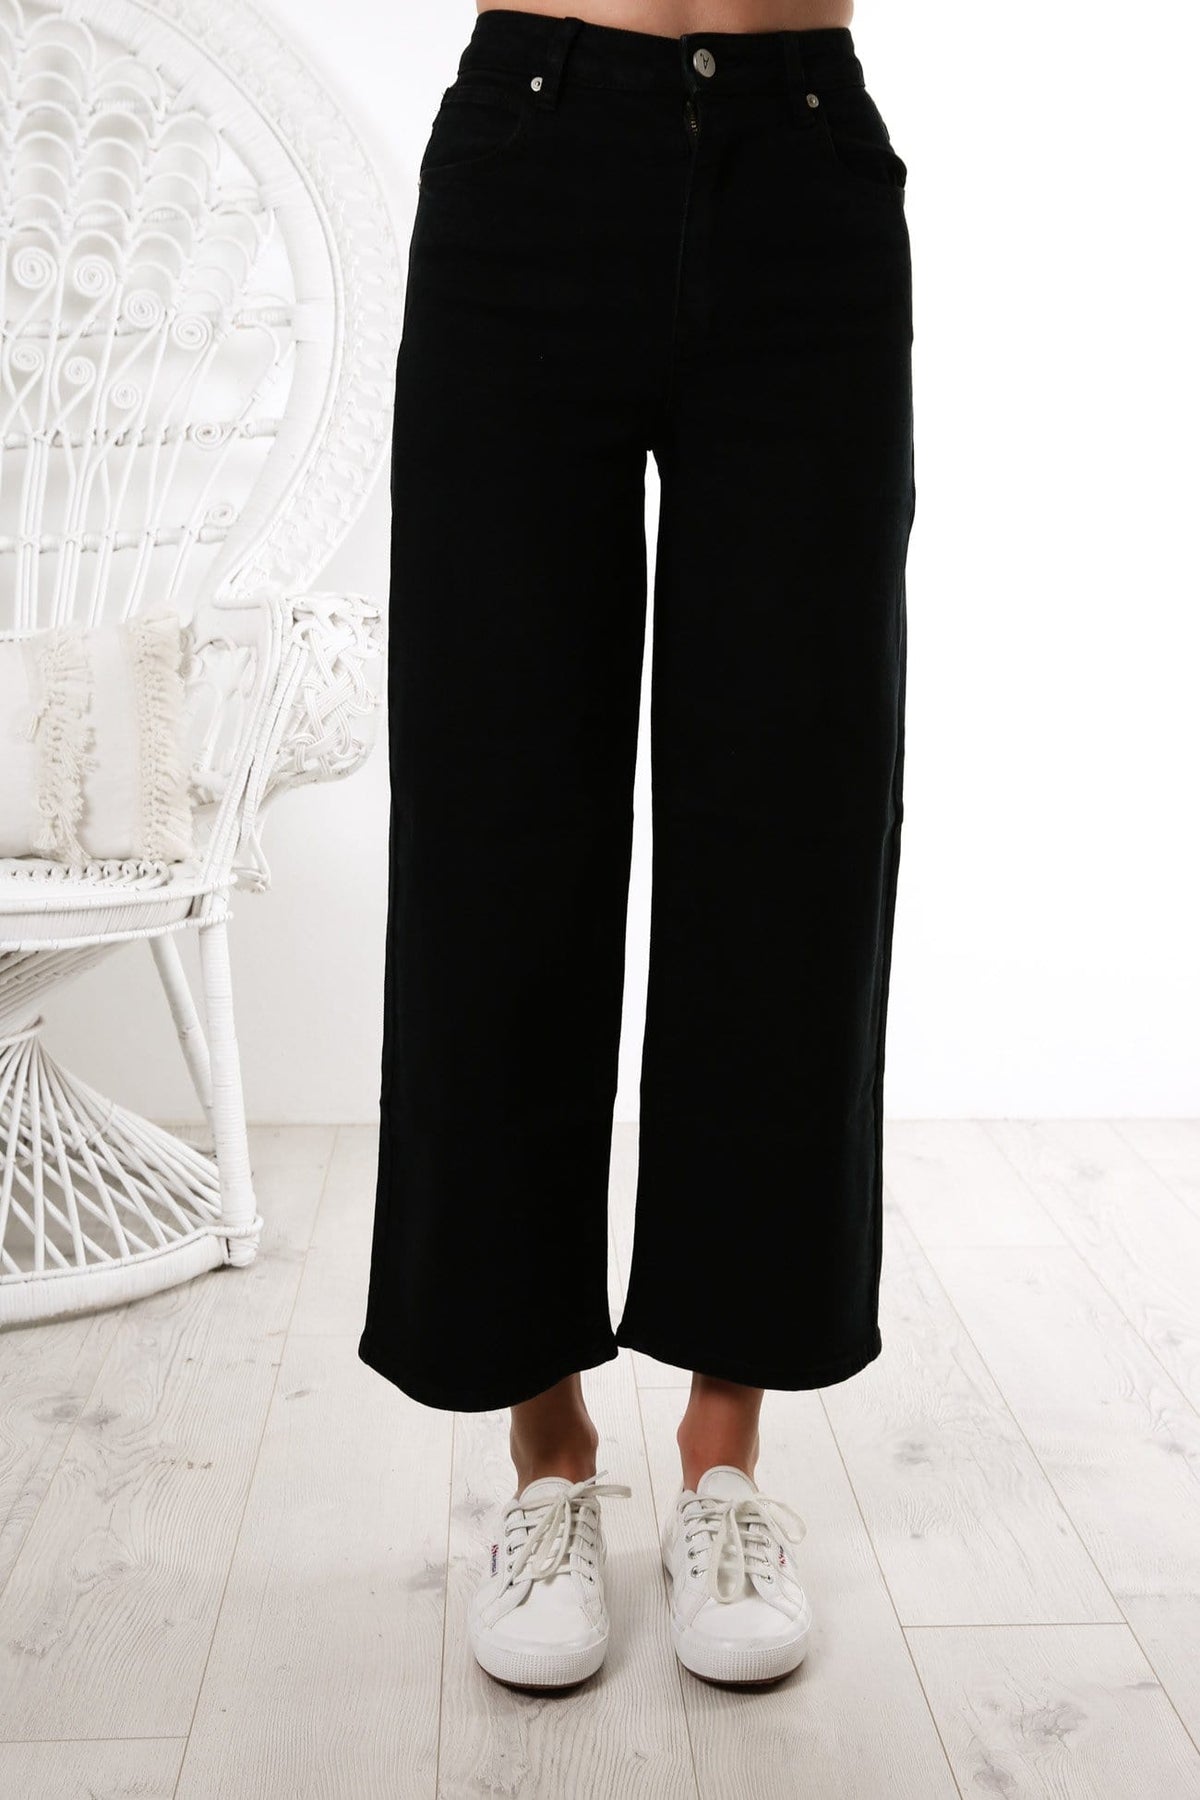 Express, High Waisted Gold Button Knit Trouser Pant in Pitch Black